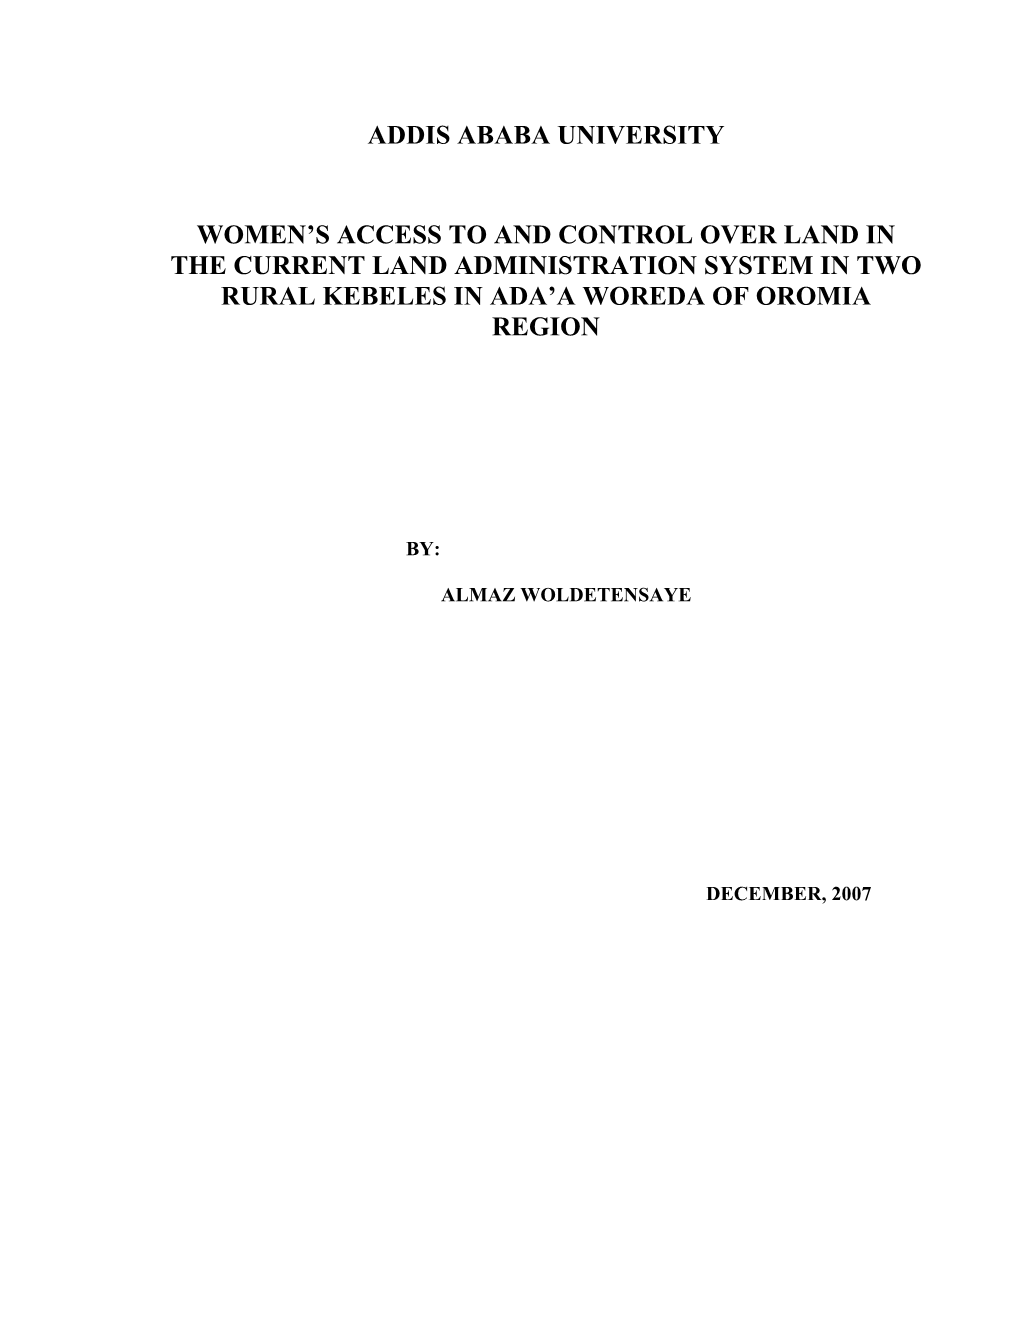 Women's Access to and Control Over Land in the Current